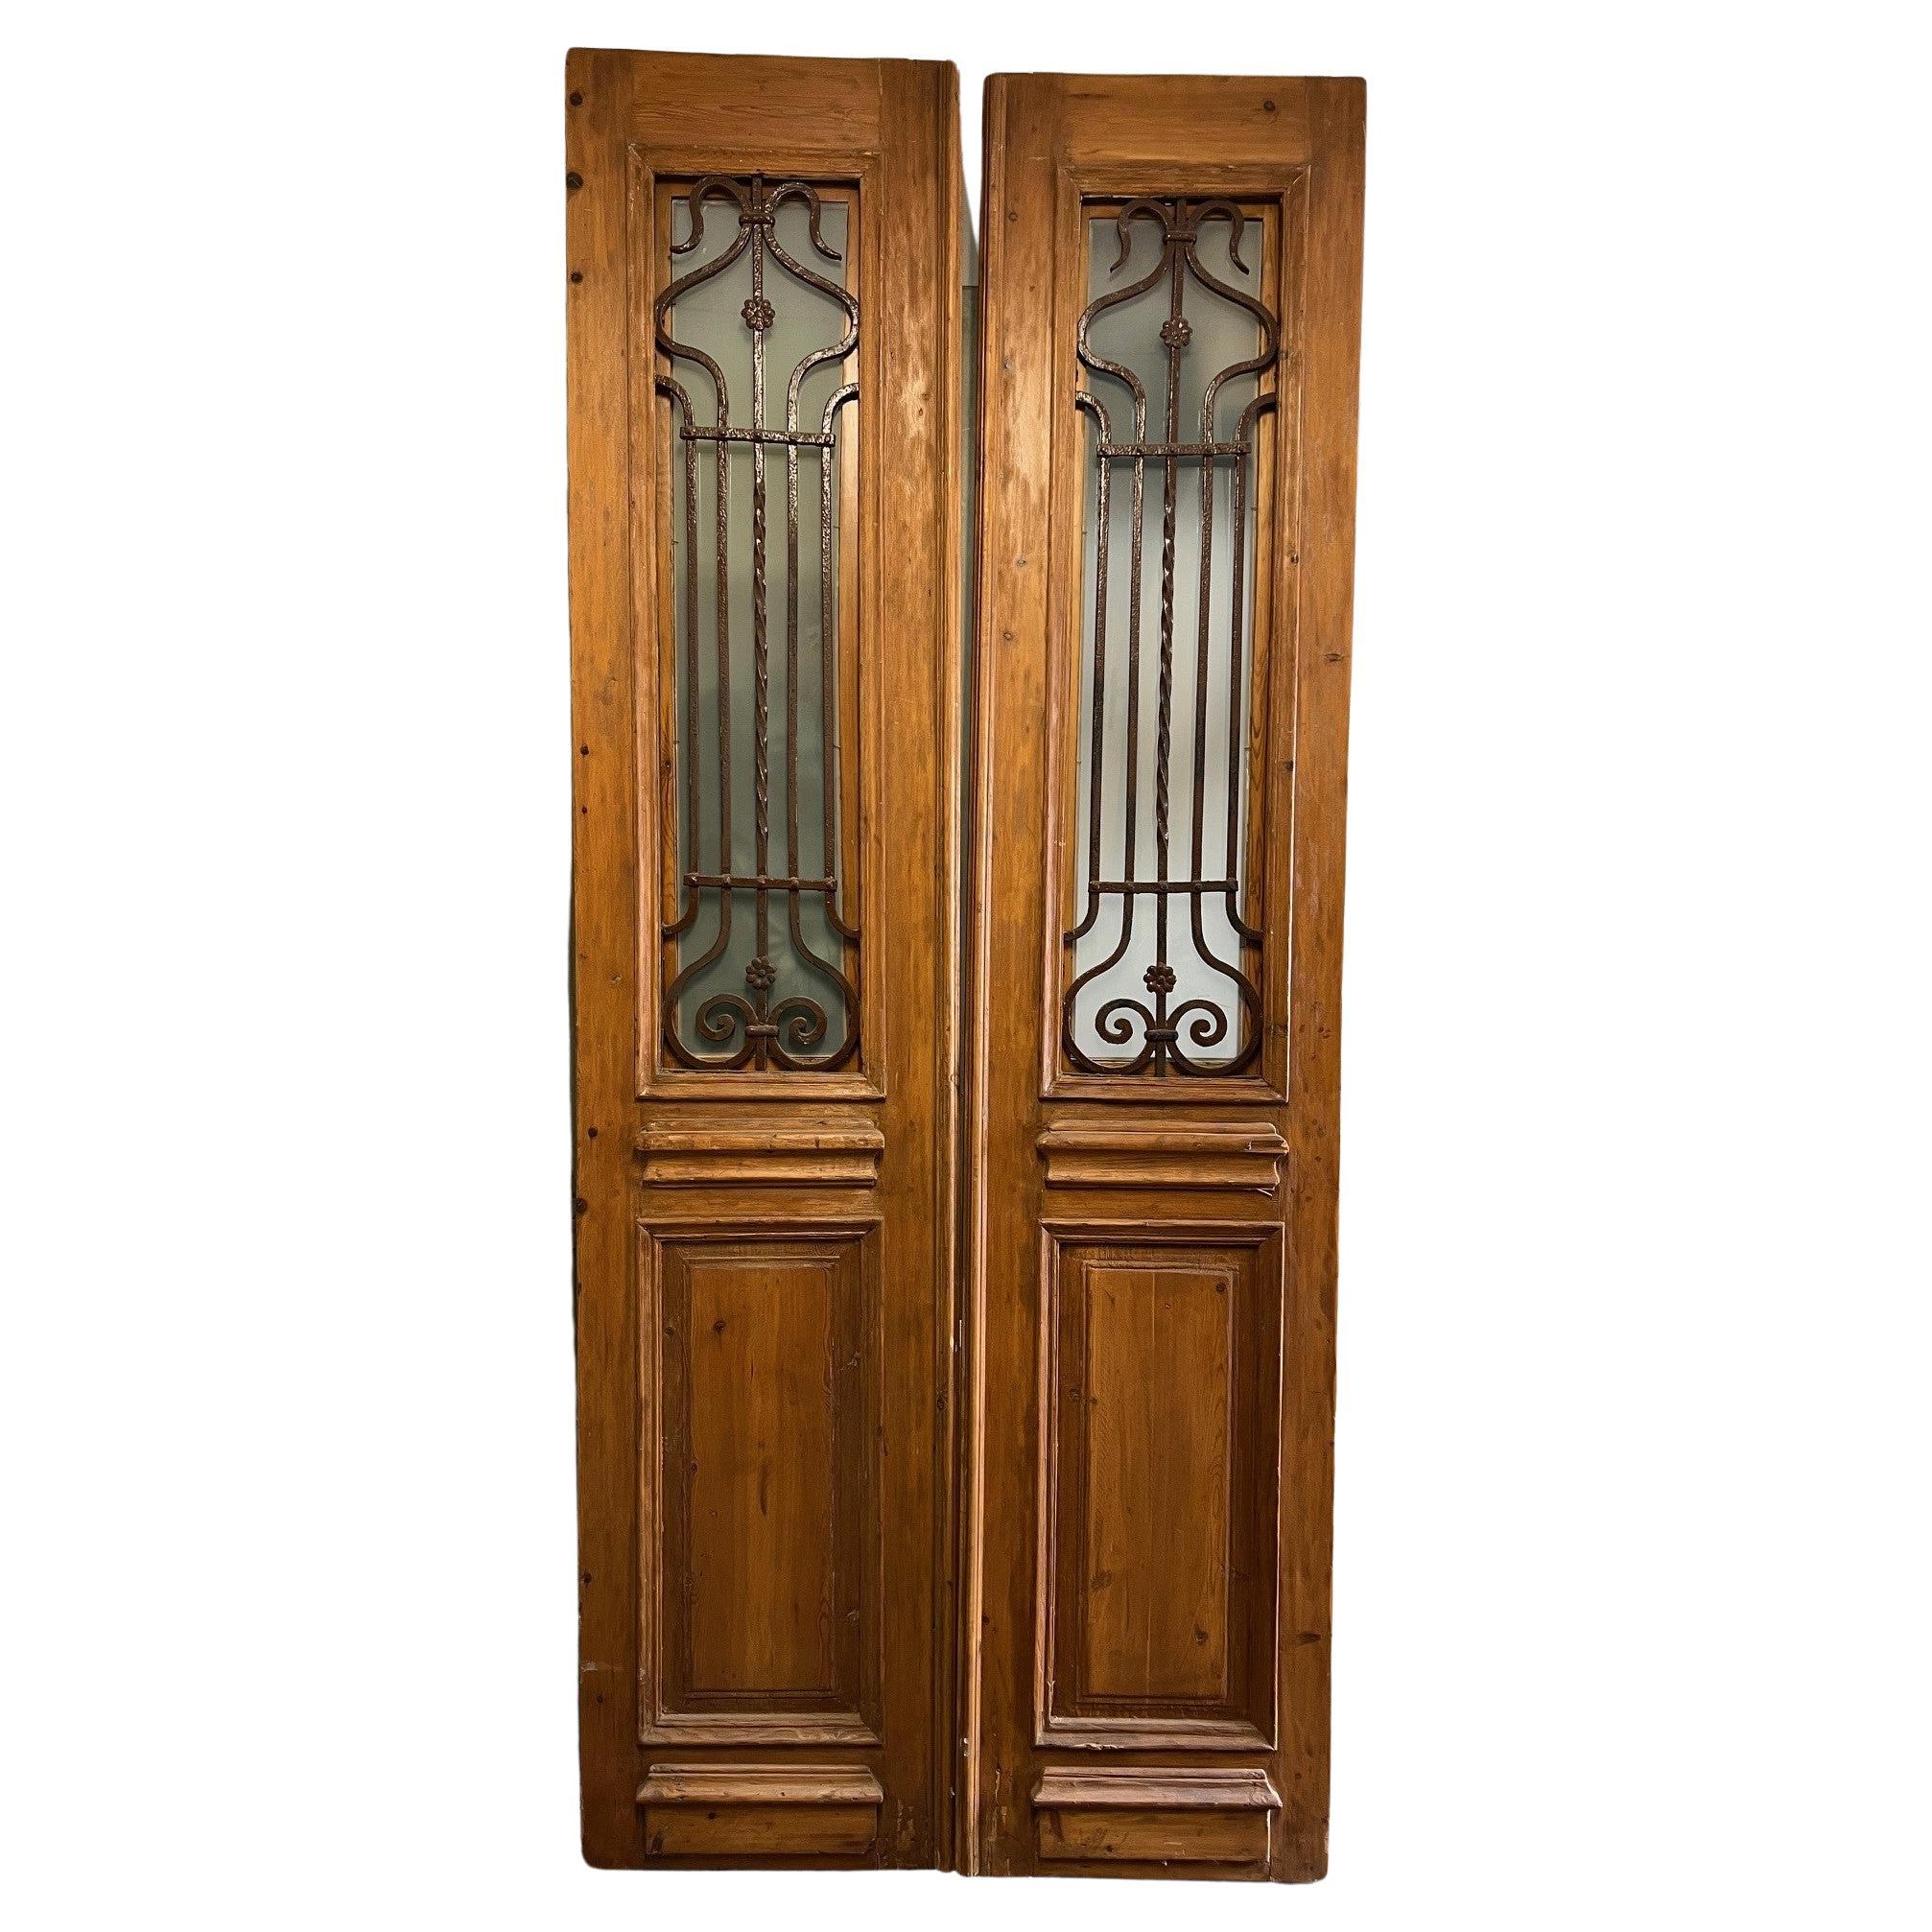 Antique Pair of Doors with Decorative Iron Panels    For Sale